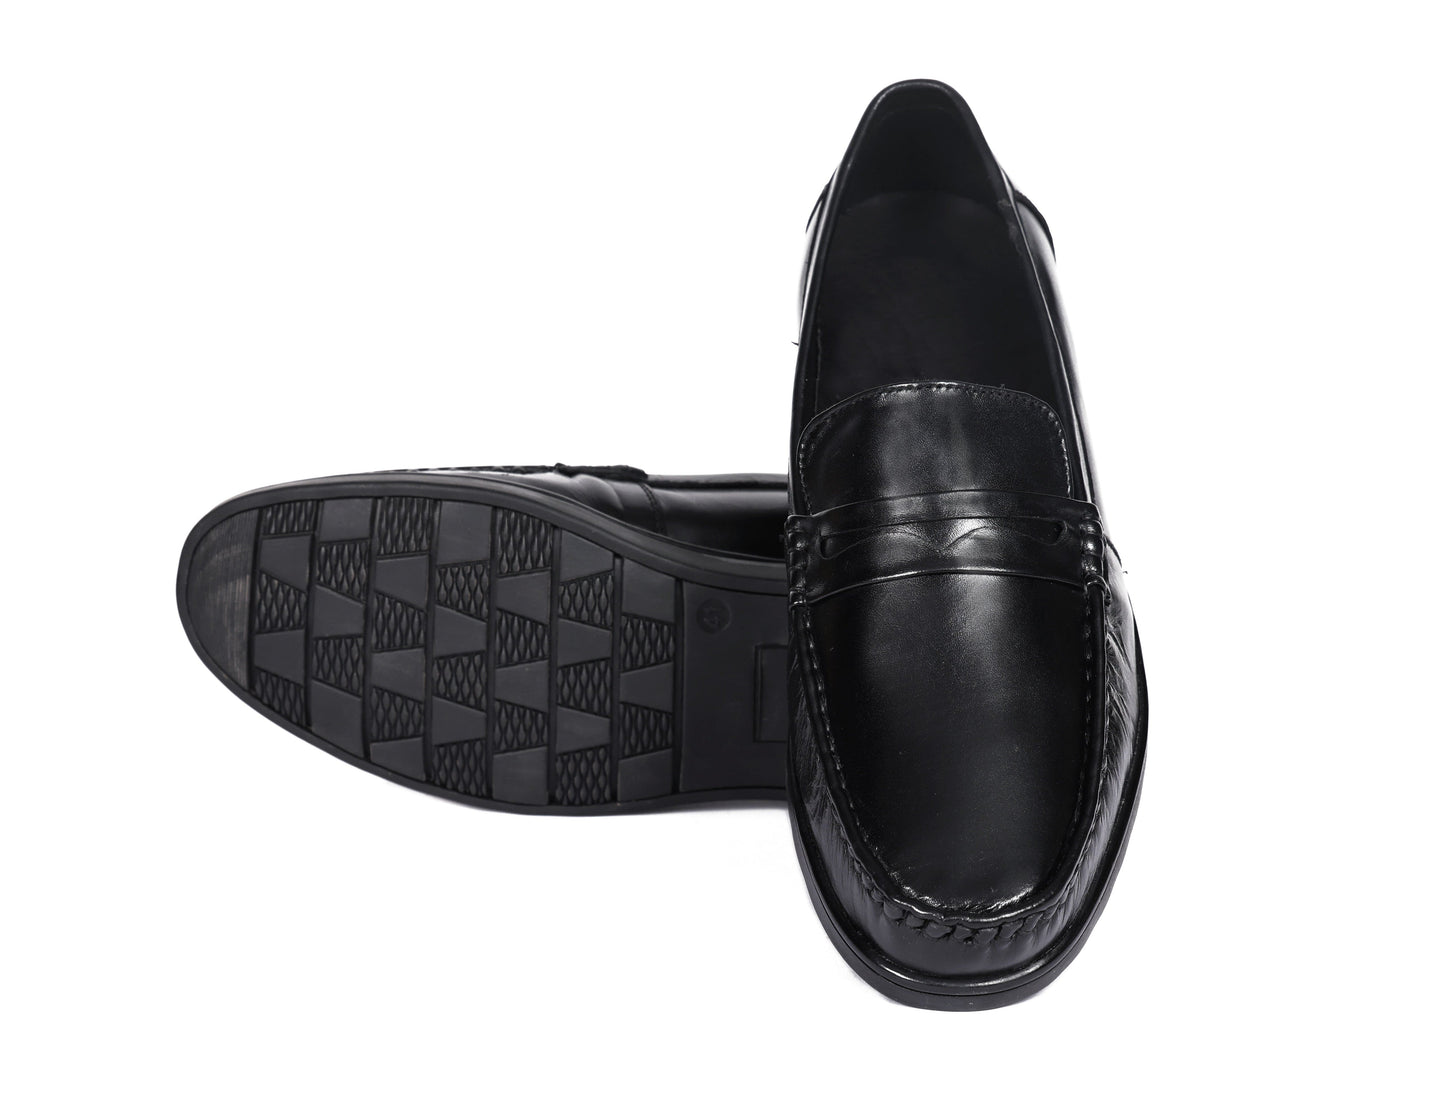 "Stride in Style: Black Casual Loafer Shoes" Art: LS-1104